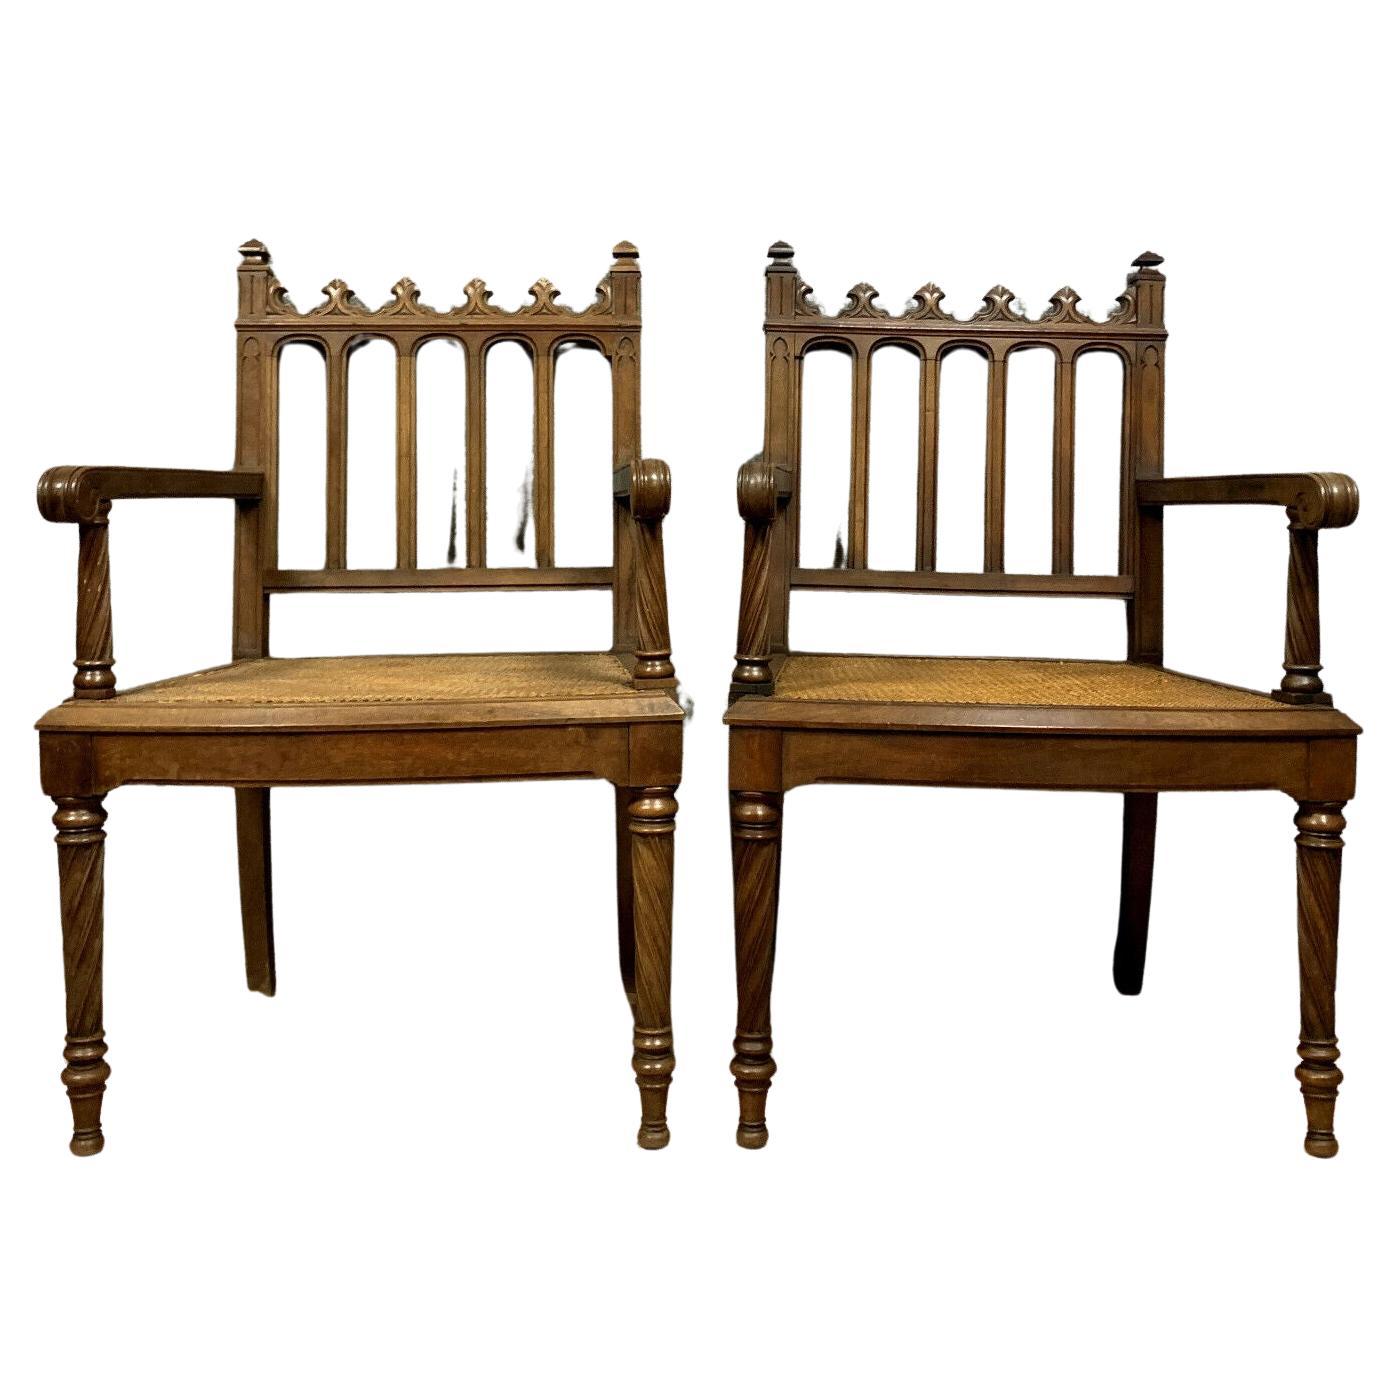 Exquisite Pair of Gothic Walnut Armchairs, circa 1850 -1X21 For Sale